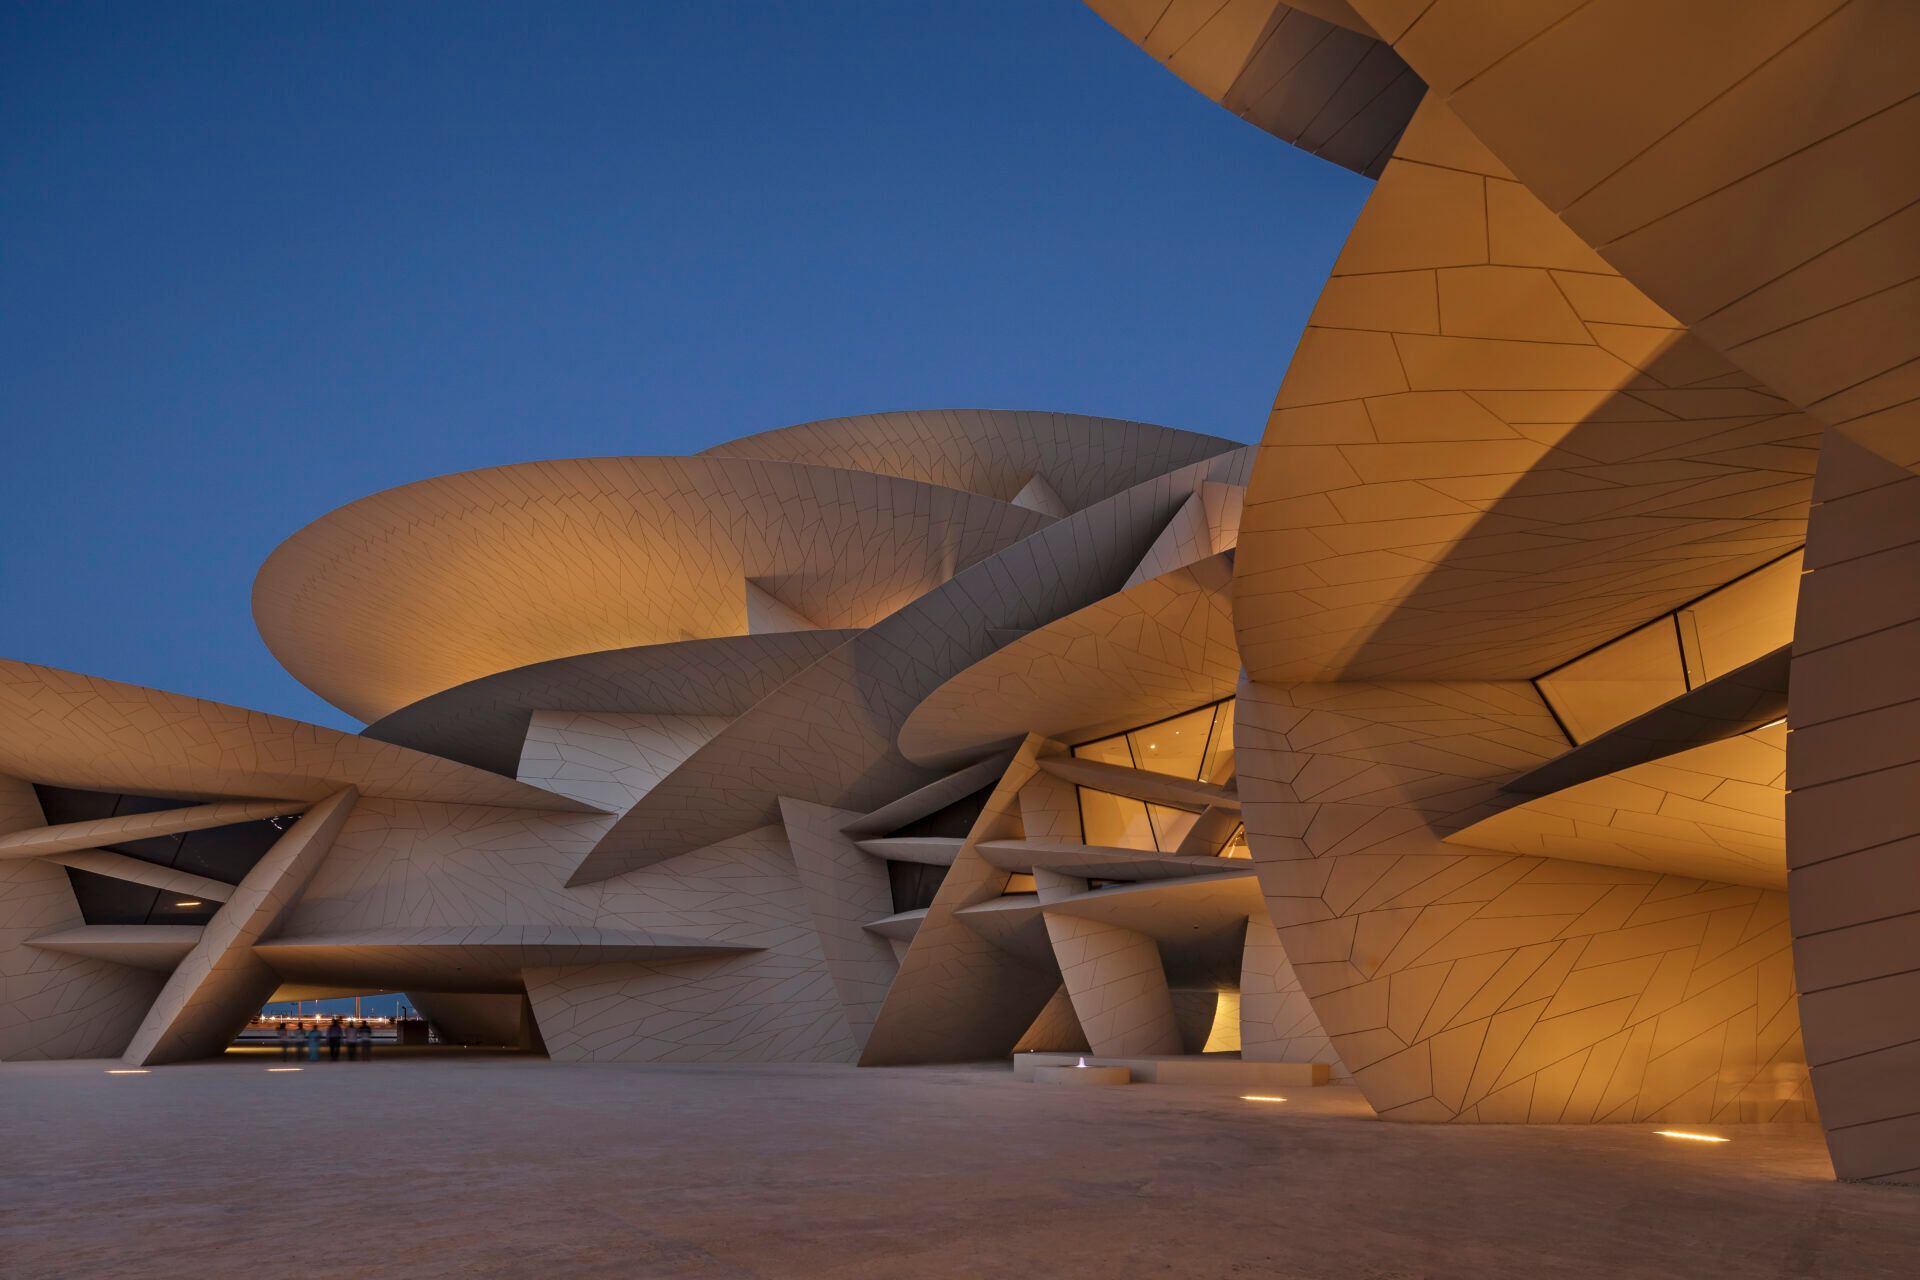 The National Museum of Qatar facade,  illuminated from below at dusk against a dark blue sky.